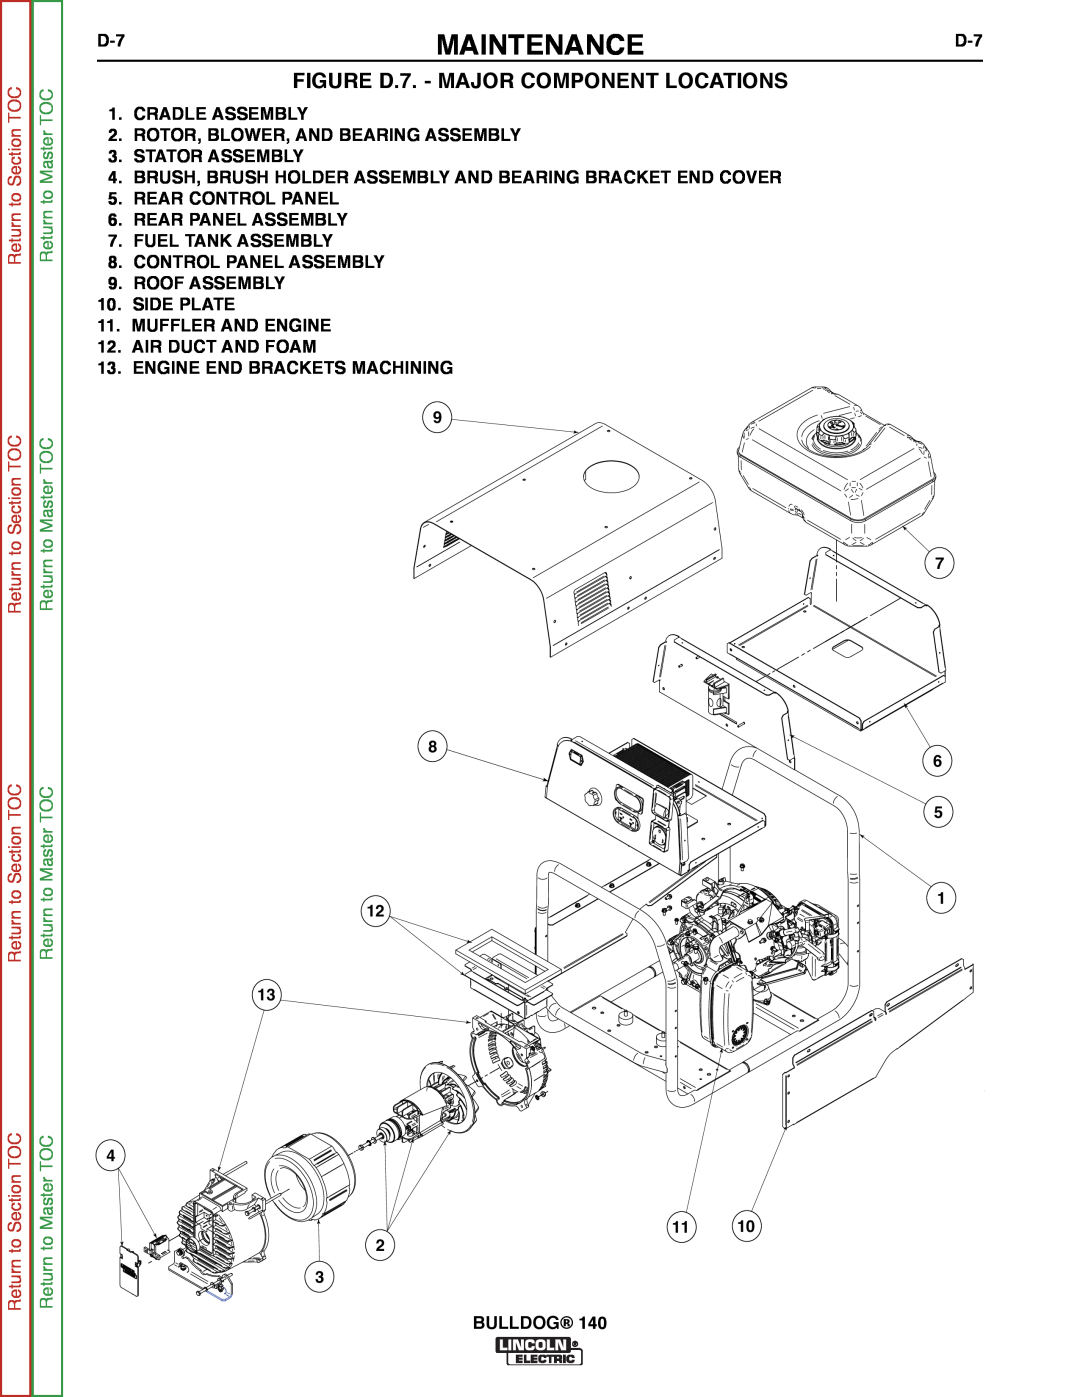 Lincoln Electric SVM208-A FIGURE D.7. - MAJOR COMPONENT LOCATIONS, Maintenance, Stator Assembly, Return to Section TOC 